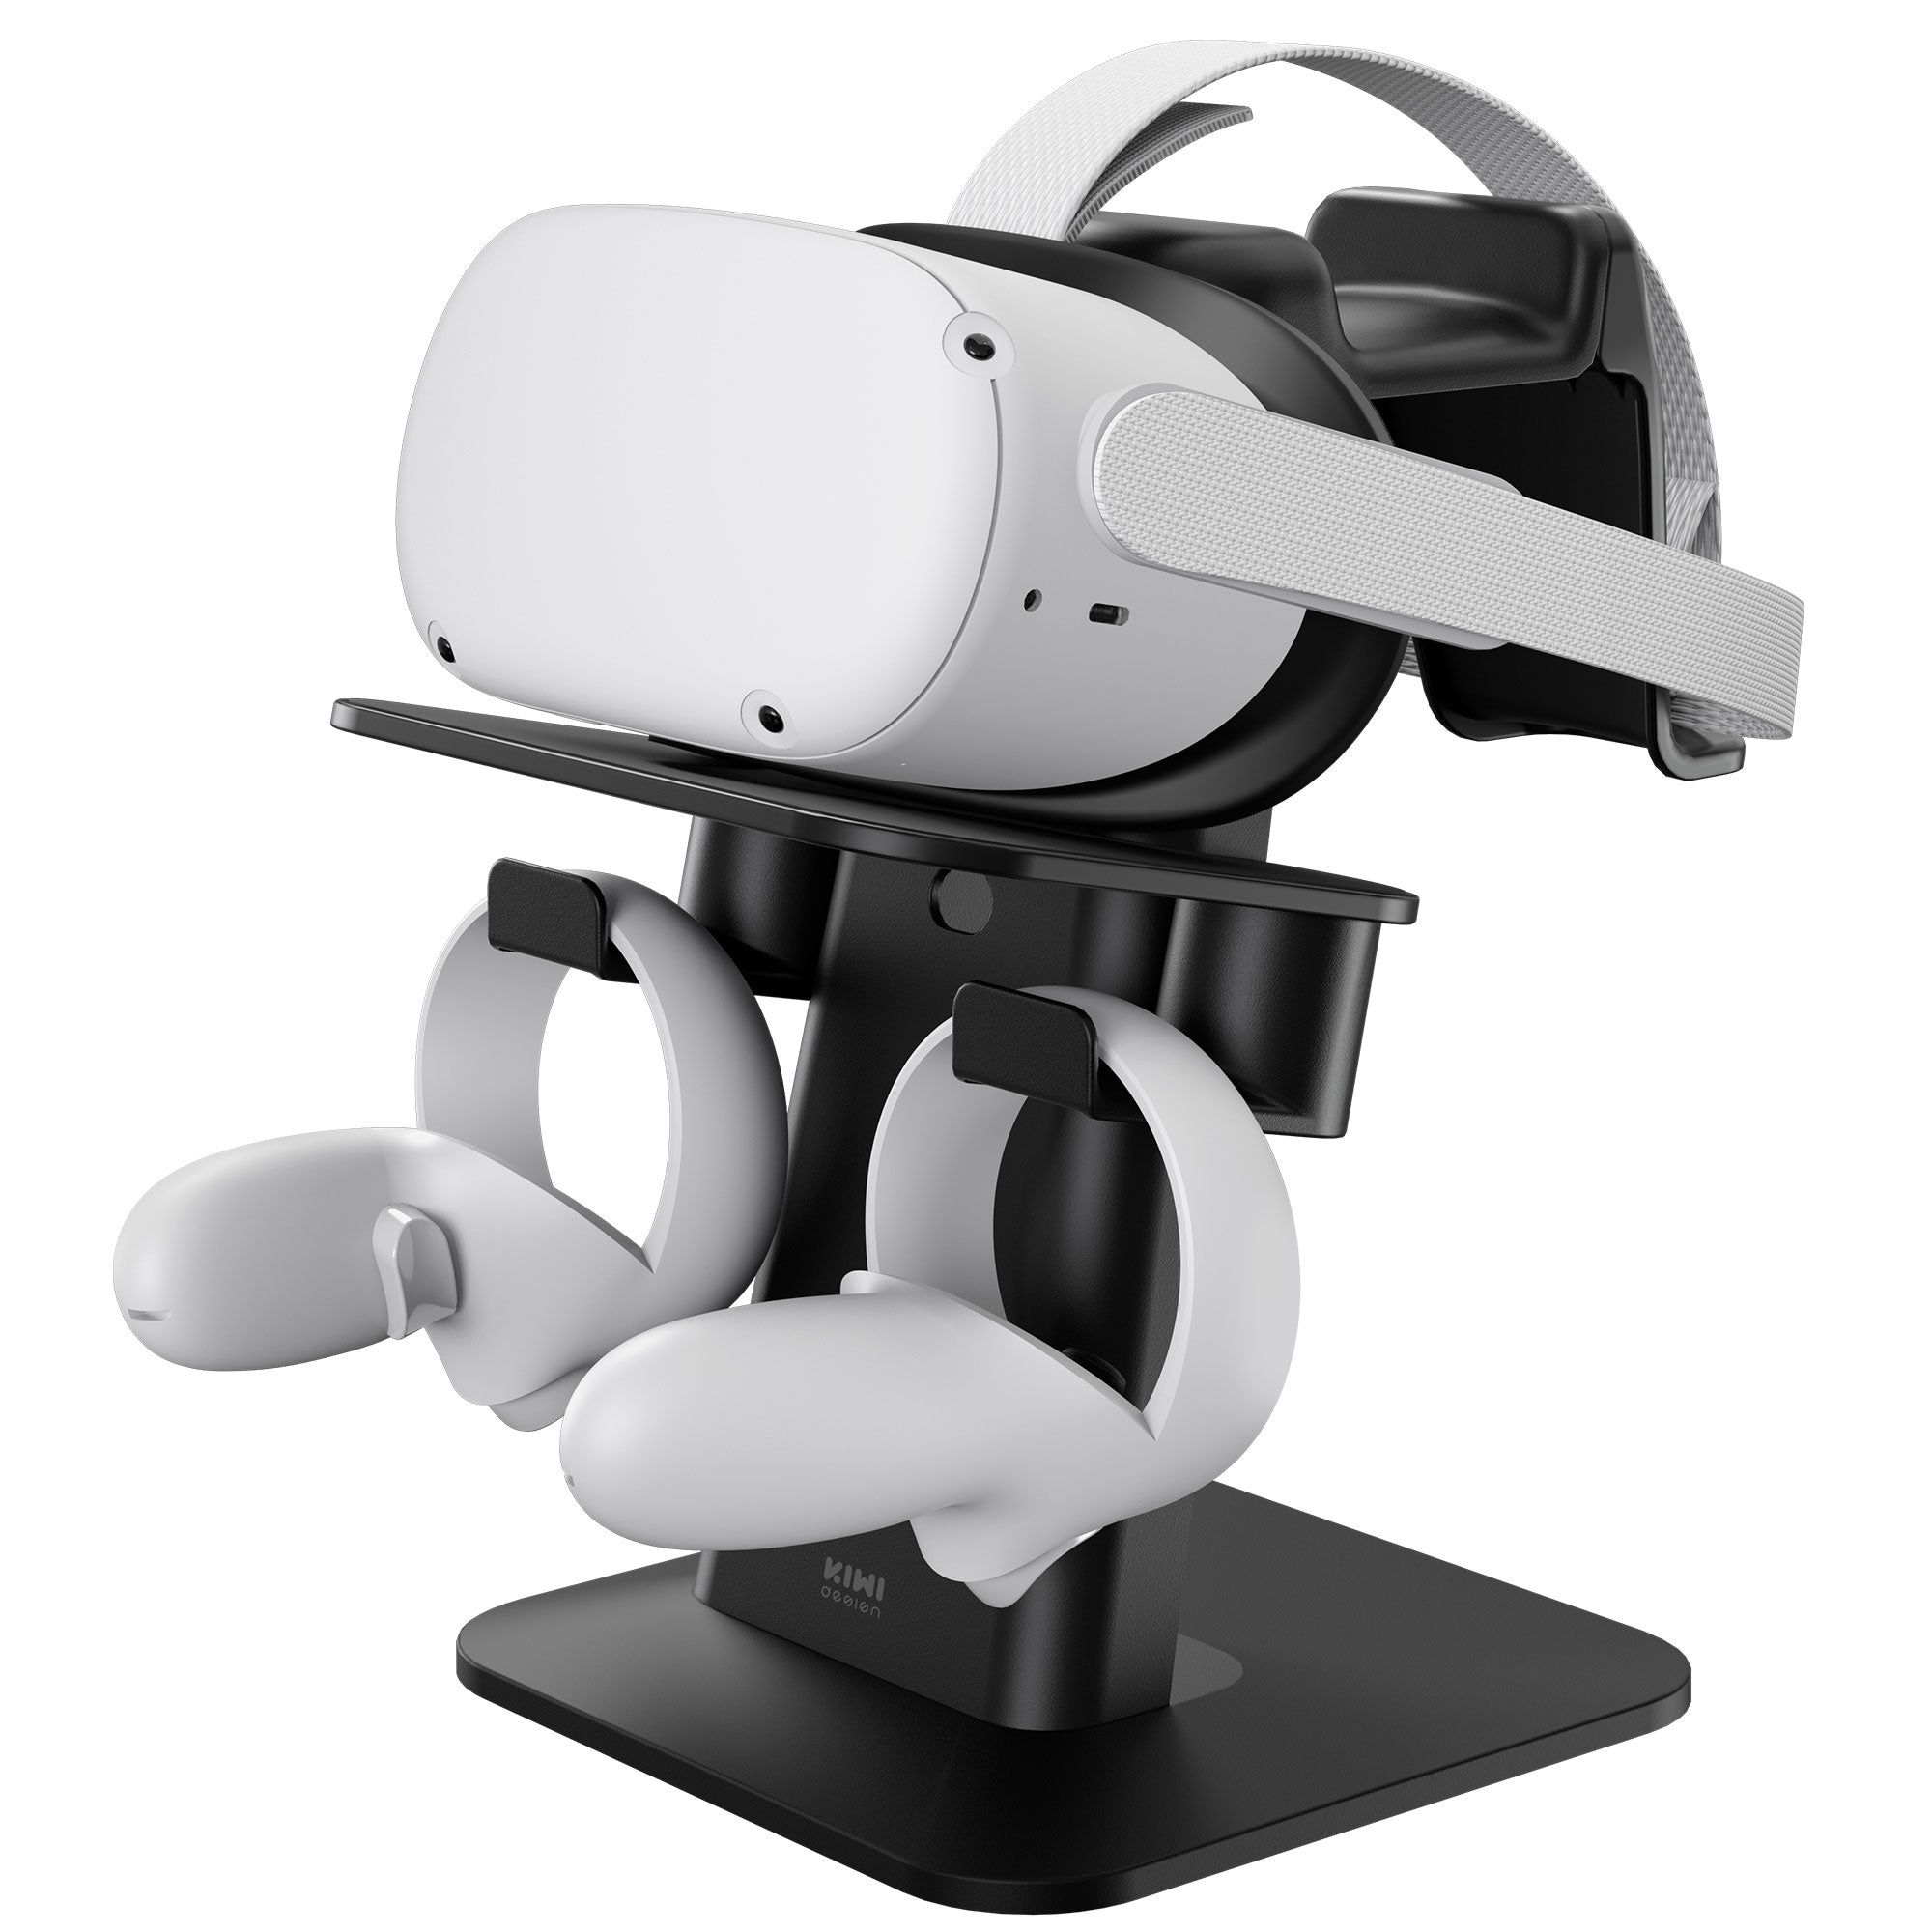 VR Stand Compatible with Quest 2/Quest 1